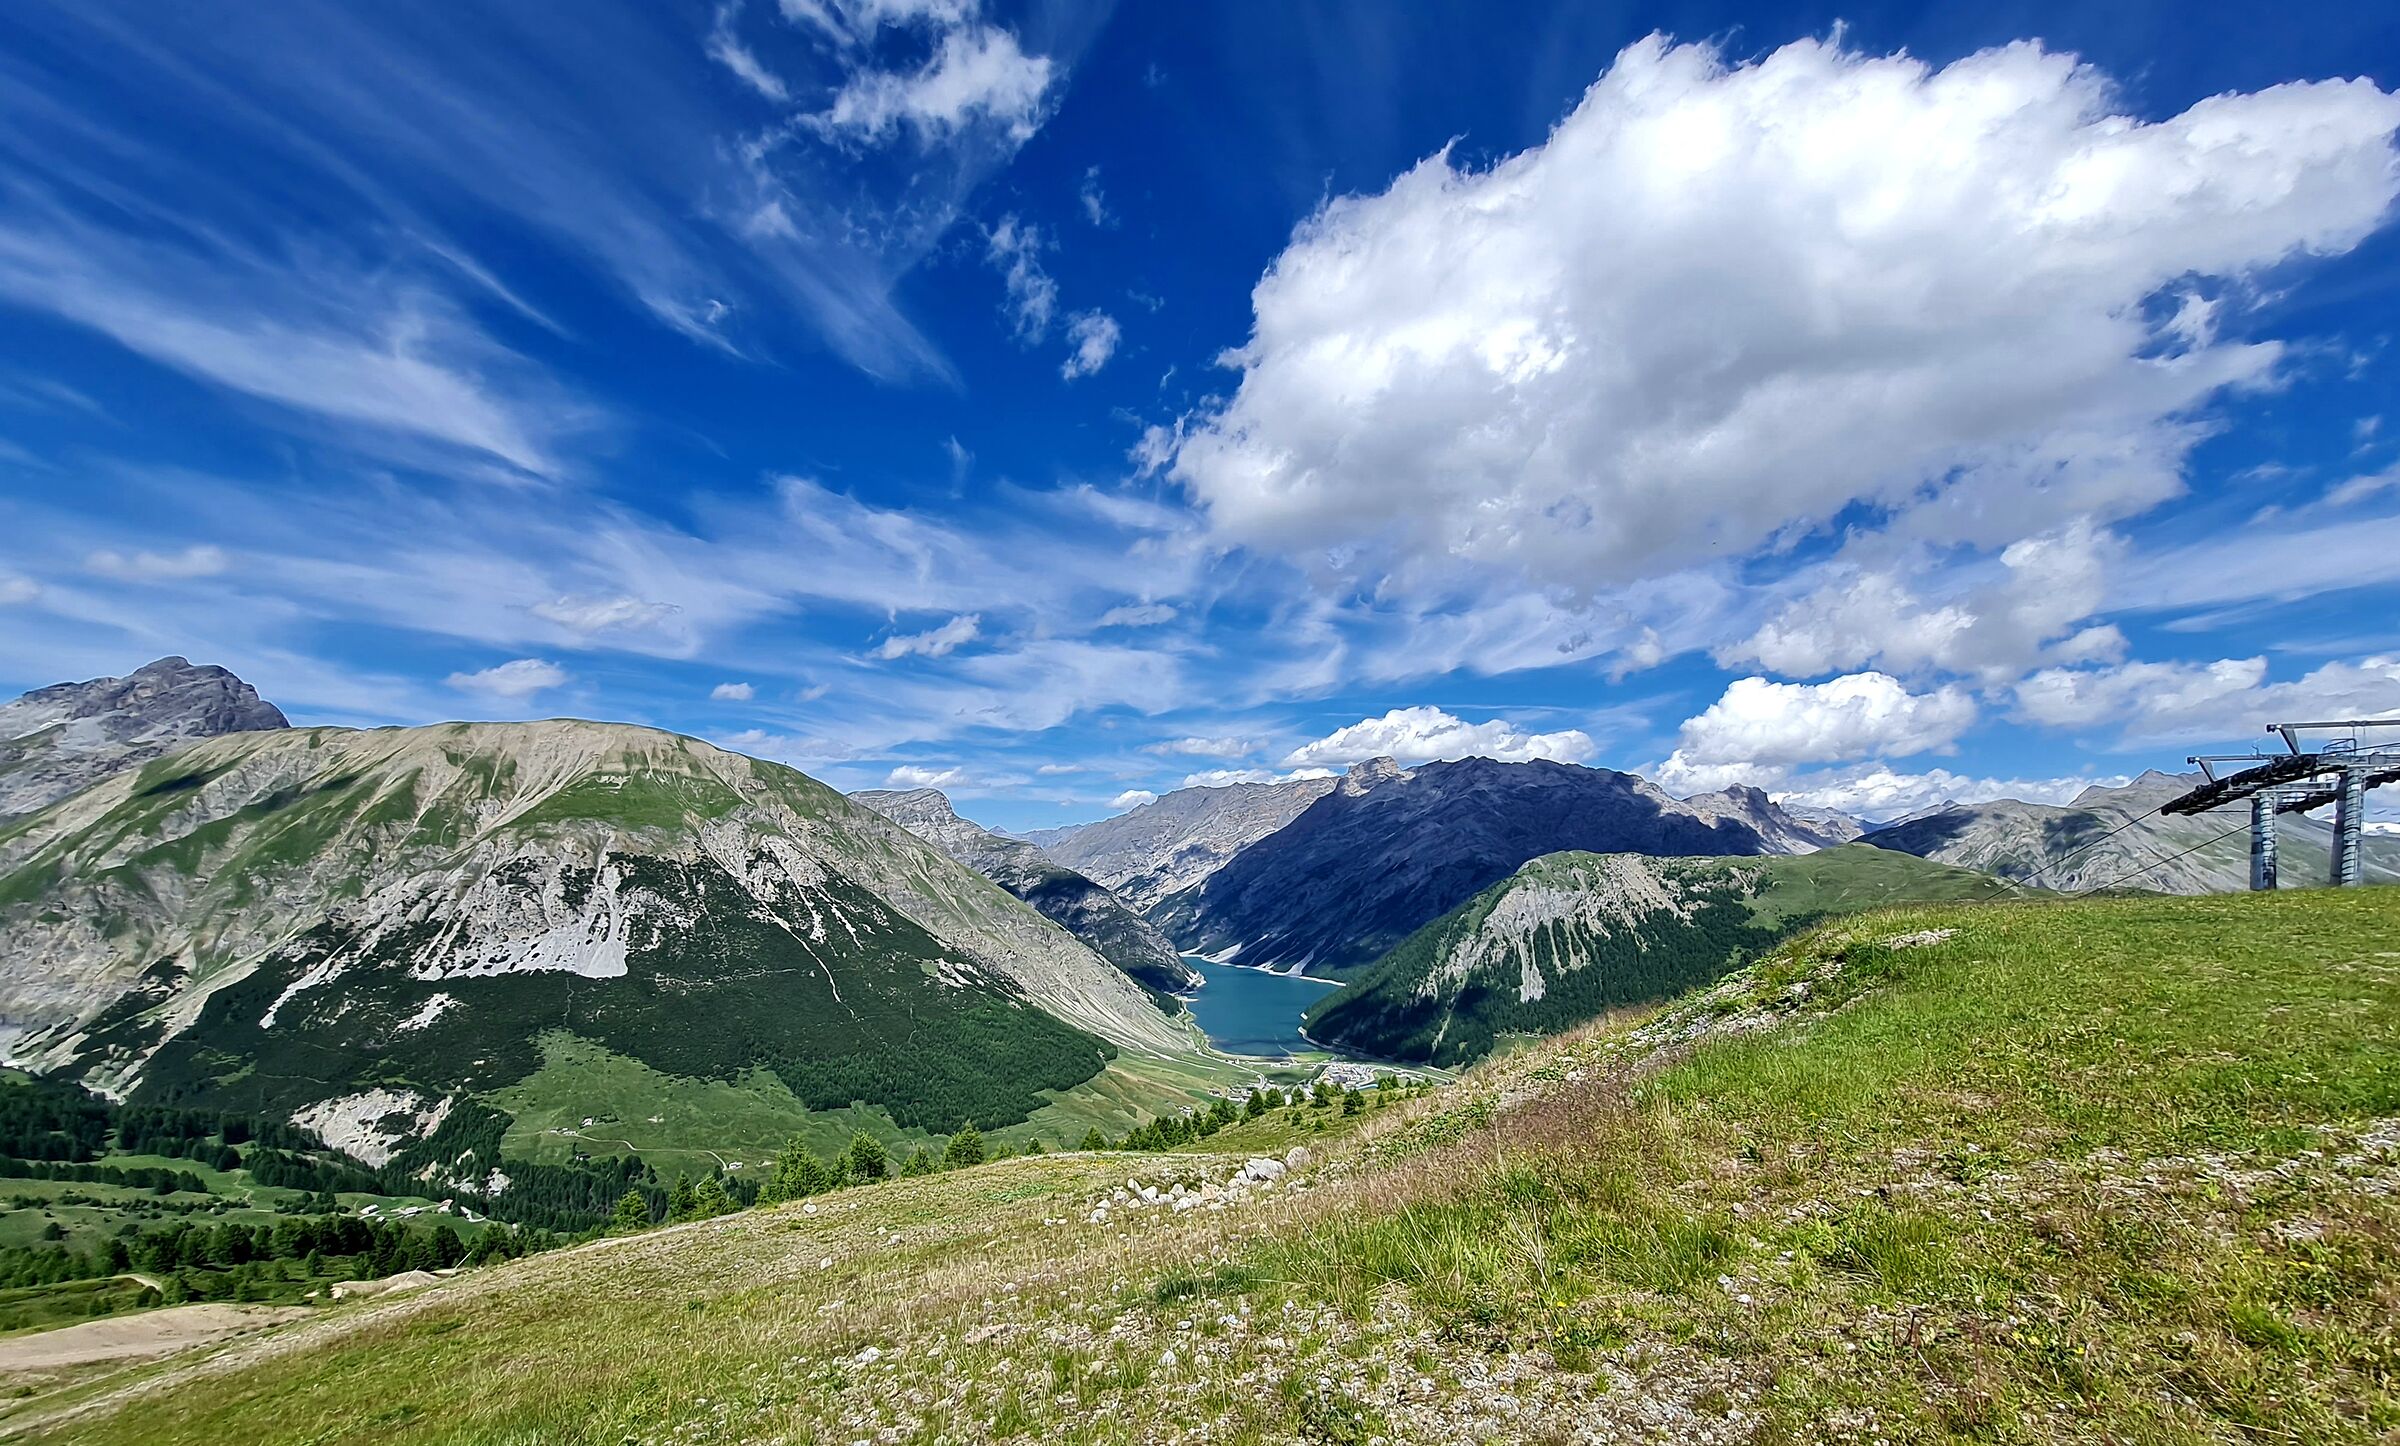 Clouds on the lake (Livigno)...